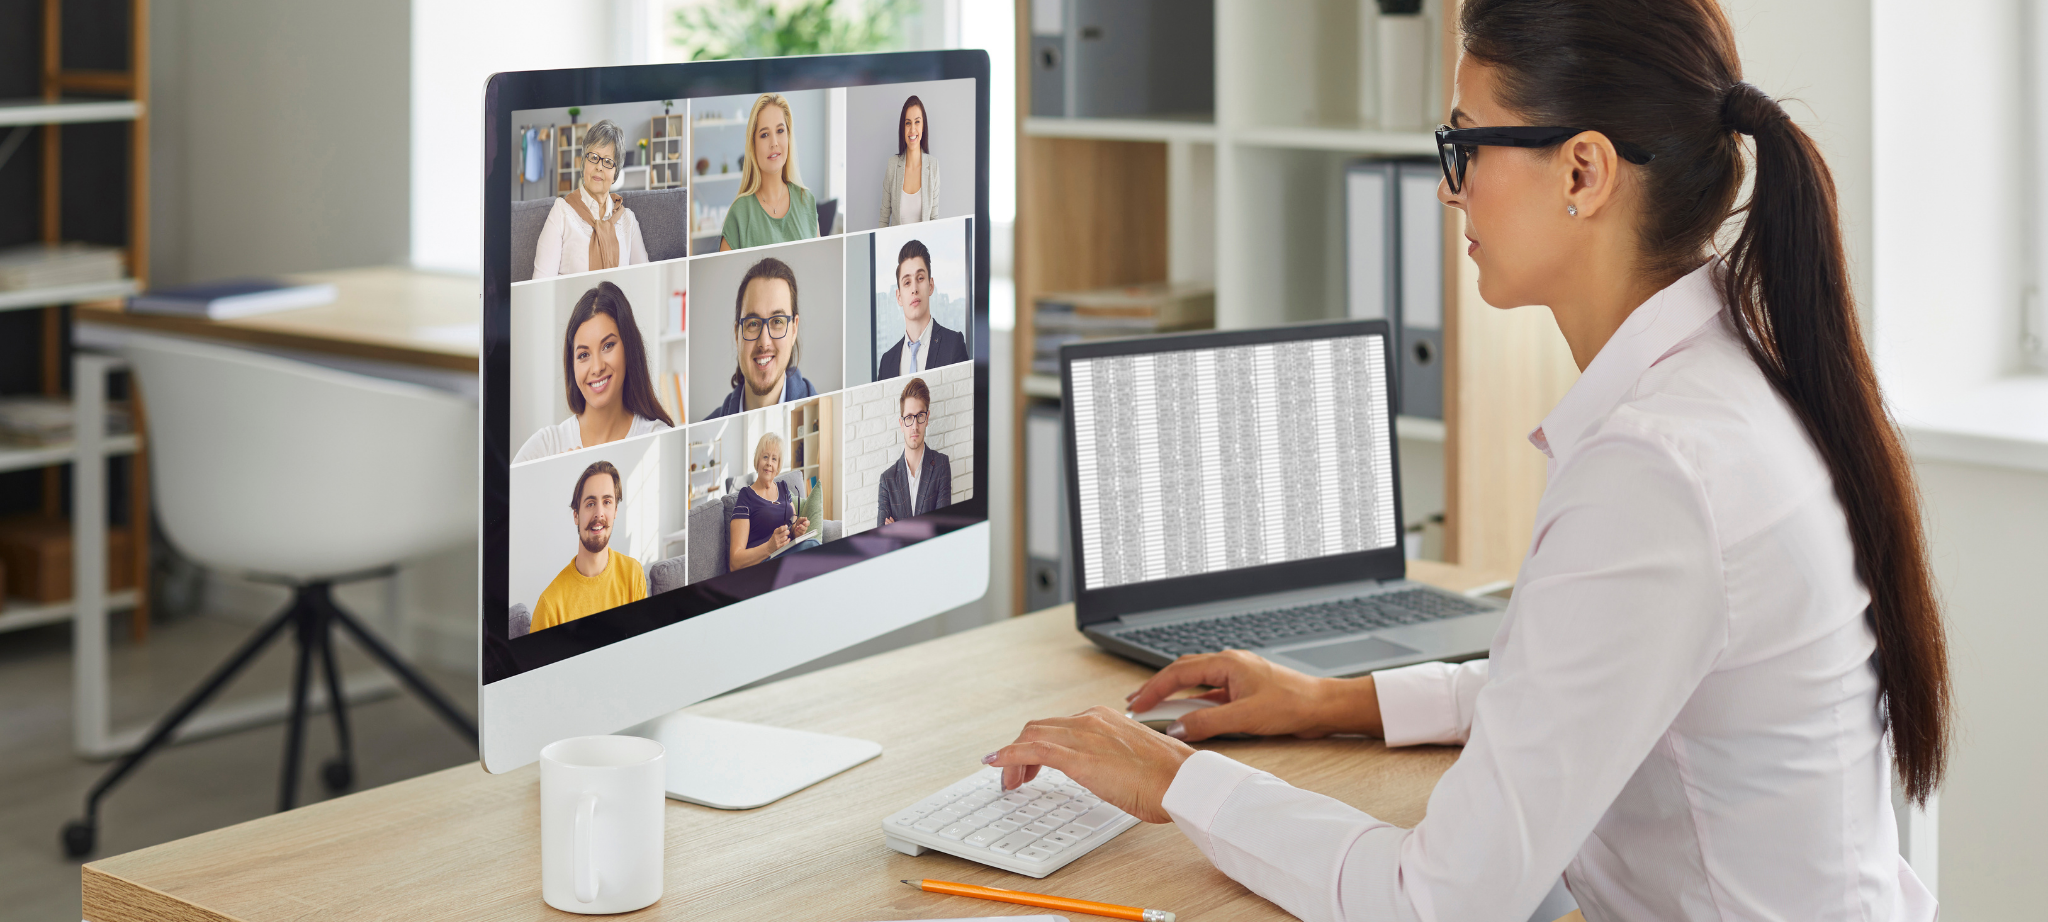 6 Tips for Securely Using Video Conference Tools